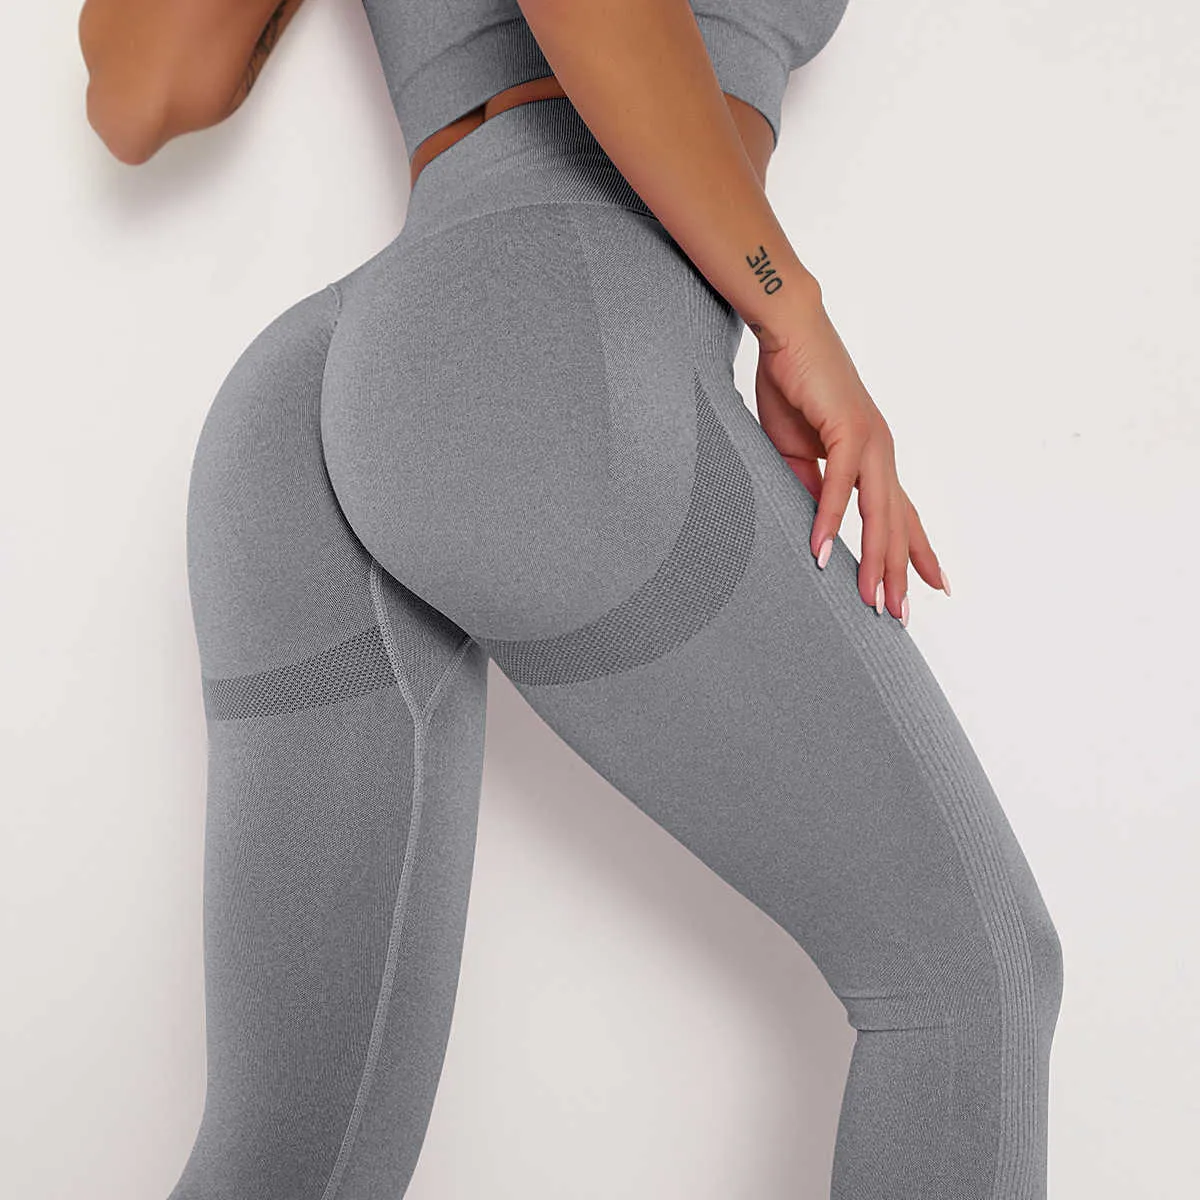 Le Nakai Seamless Yoga Leggings For Women Big Booty Seamless Workout Pants  With Arise Scrunch Design Athletic Wear For Workout And Yoga T230211 From  Sts_018, $15.18